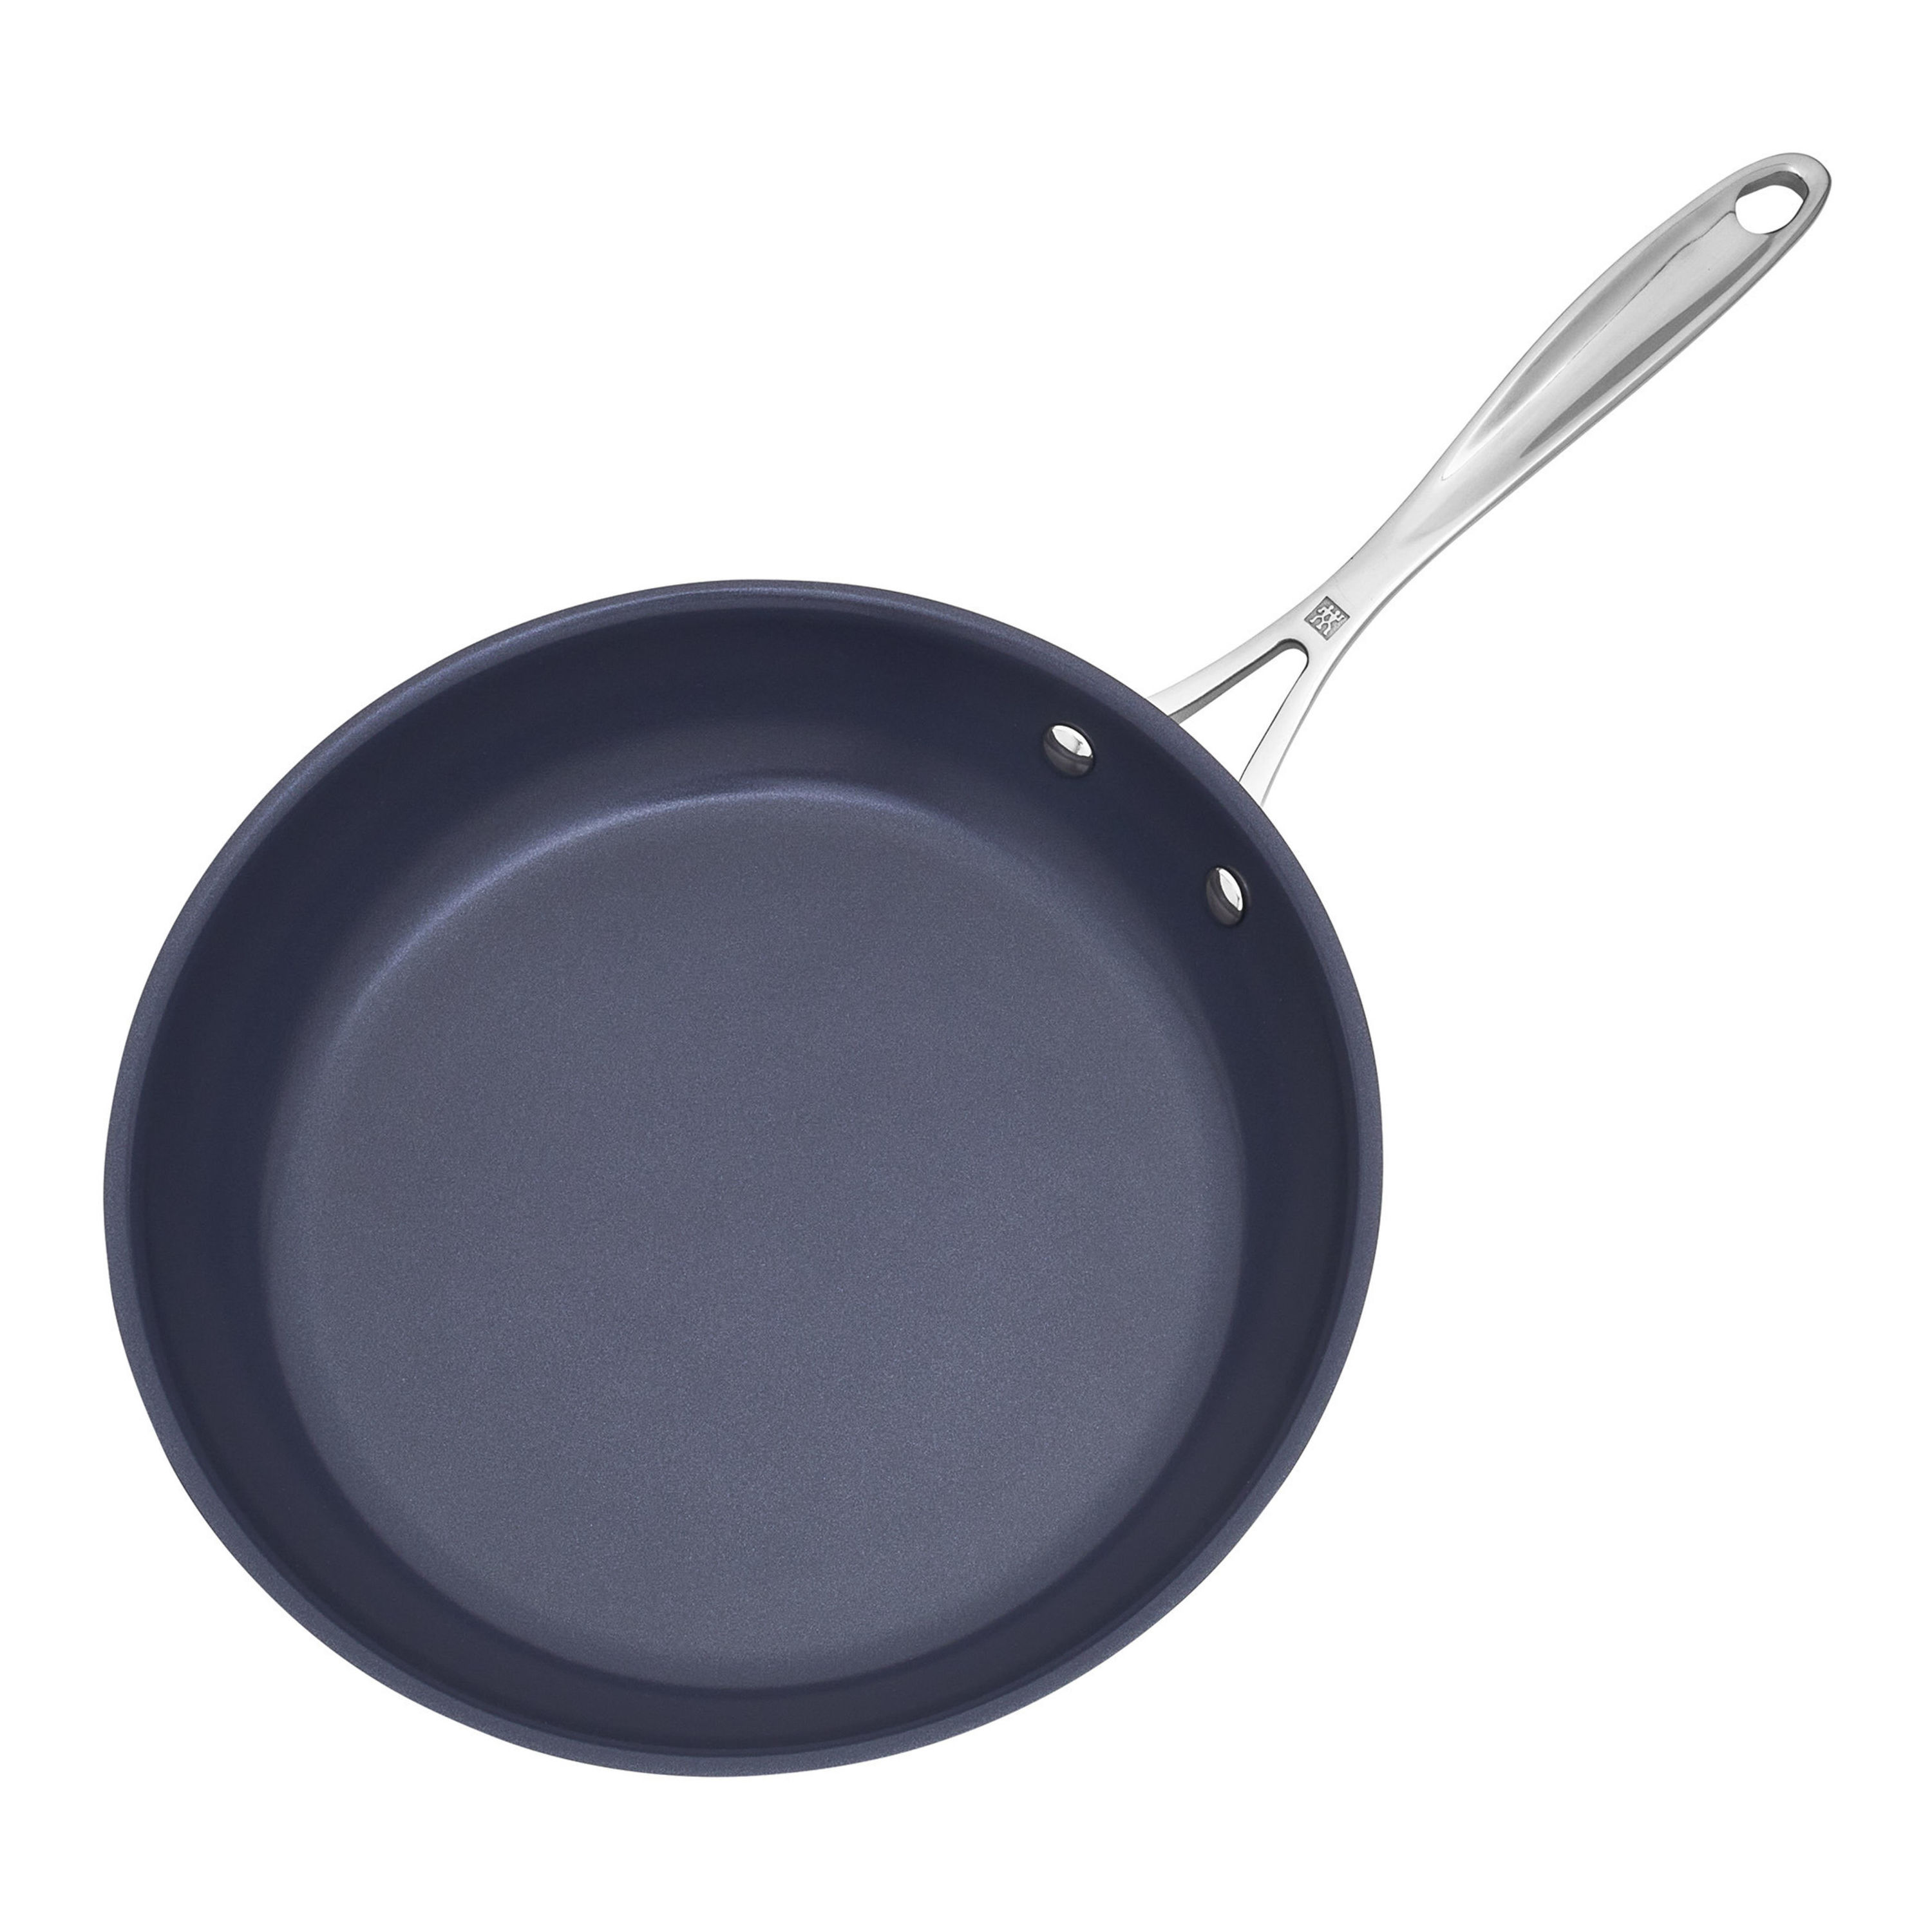 ZWILLING J.A. Henckels 10 Clad Xtreme Ceramic Frying Pan +